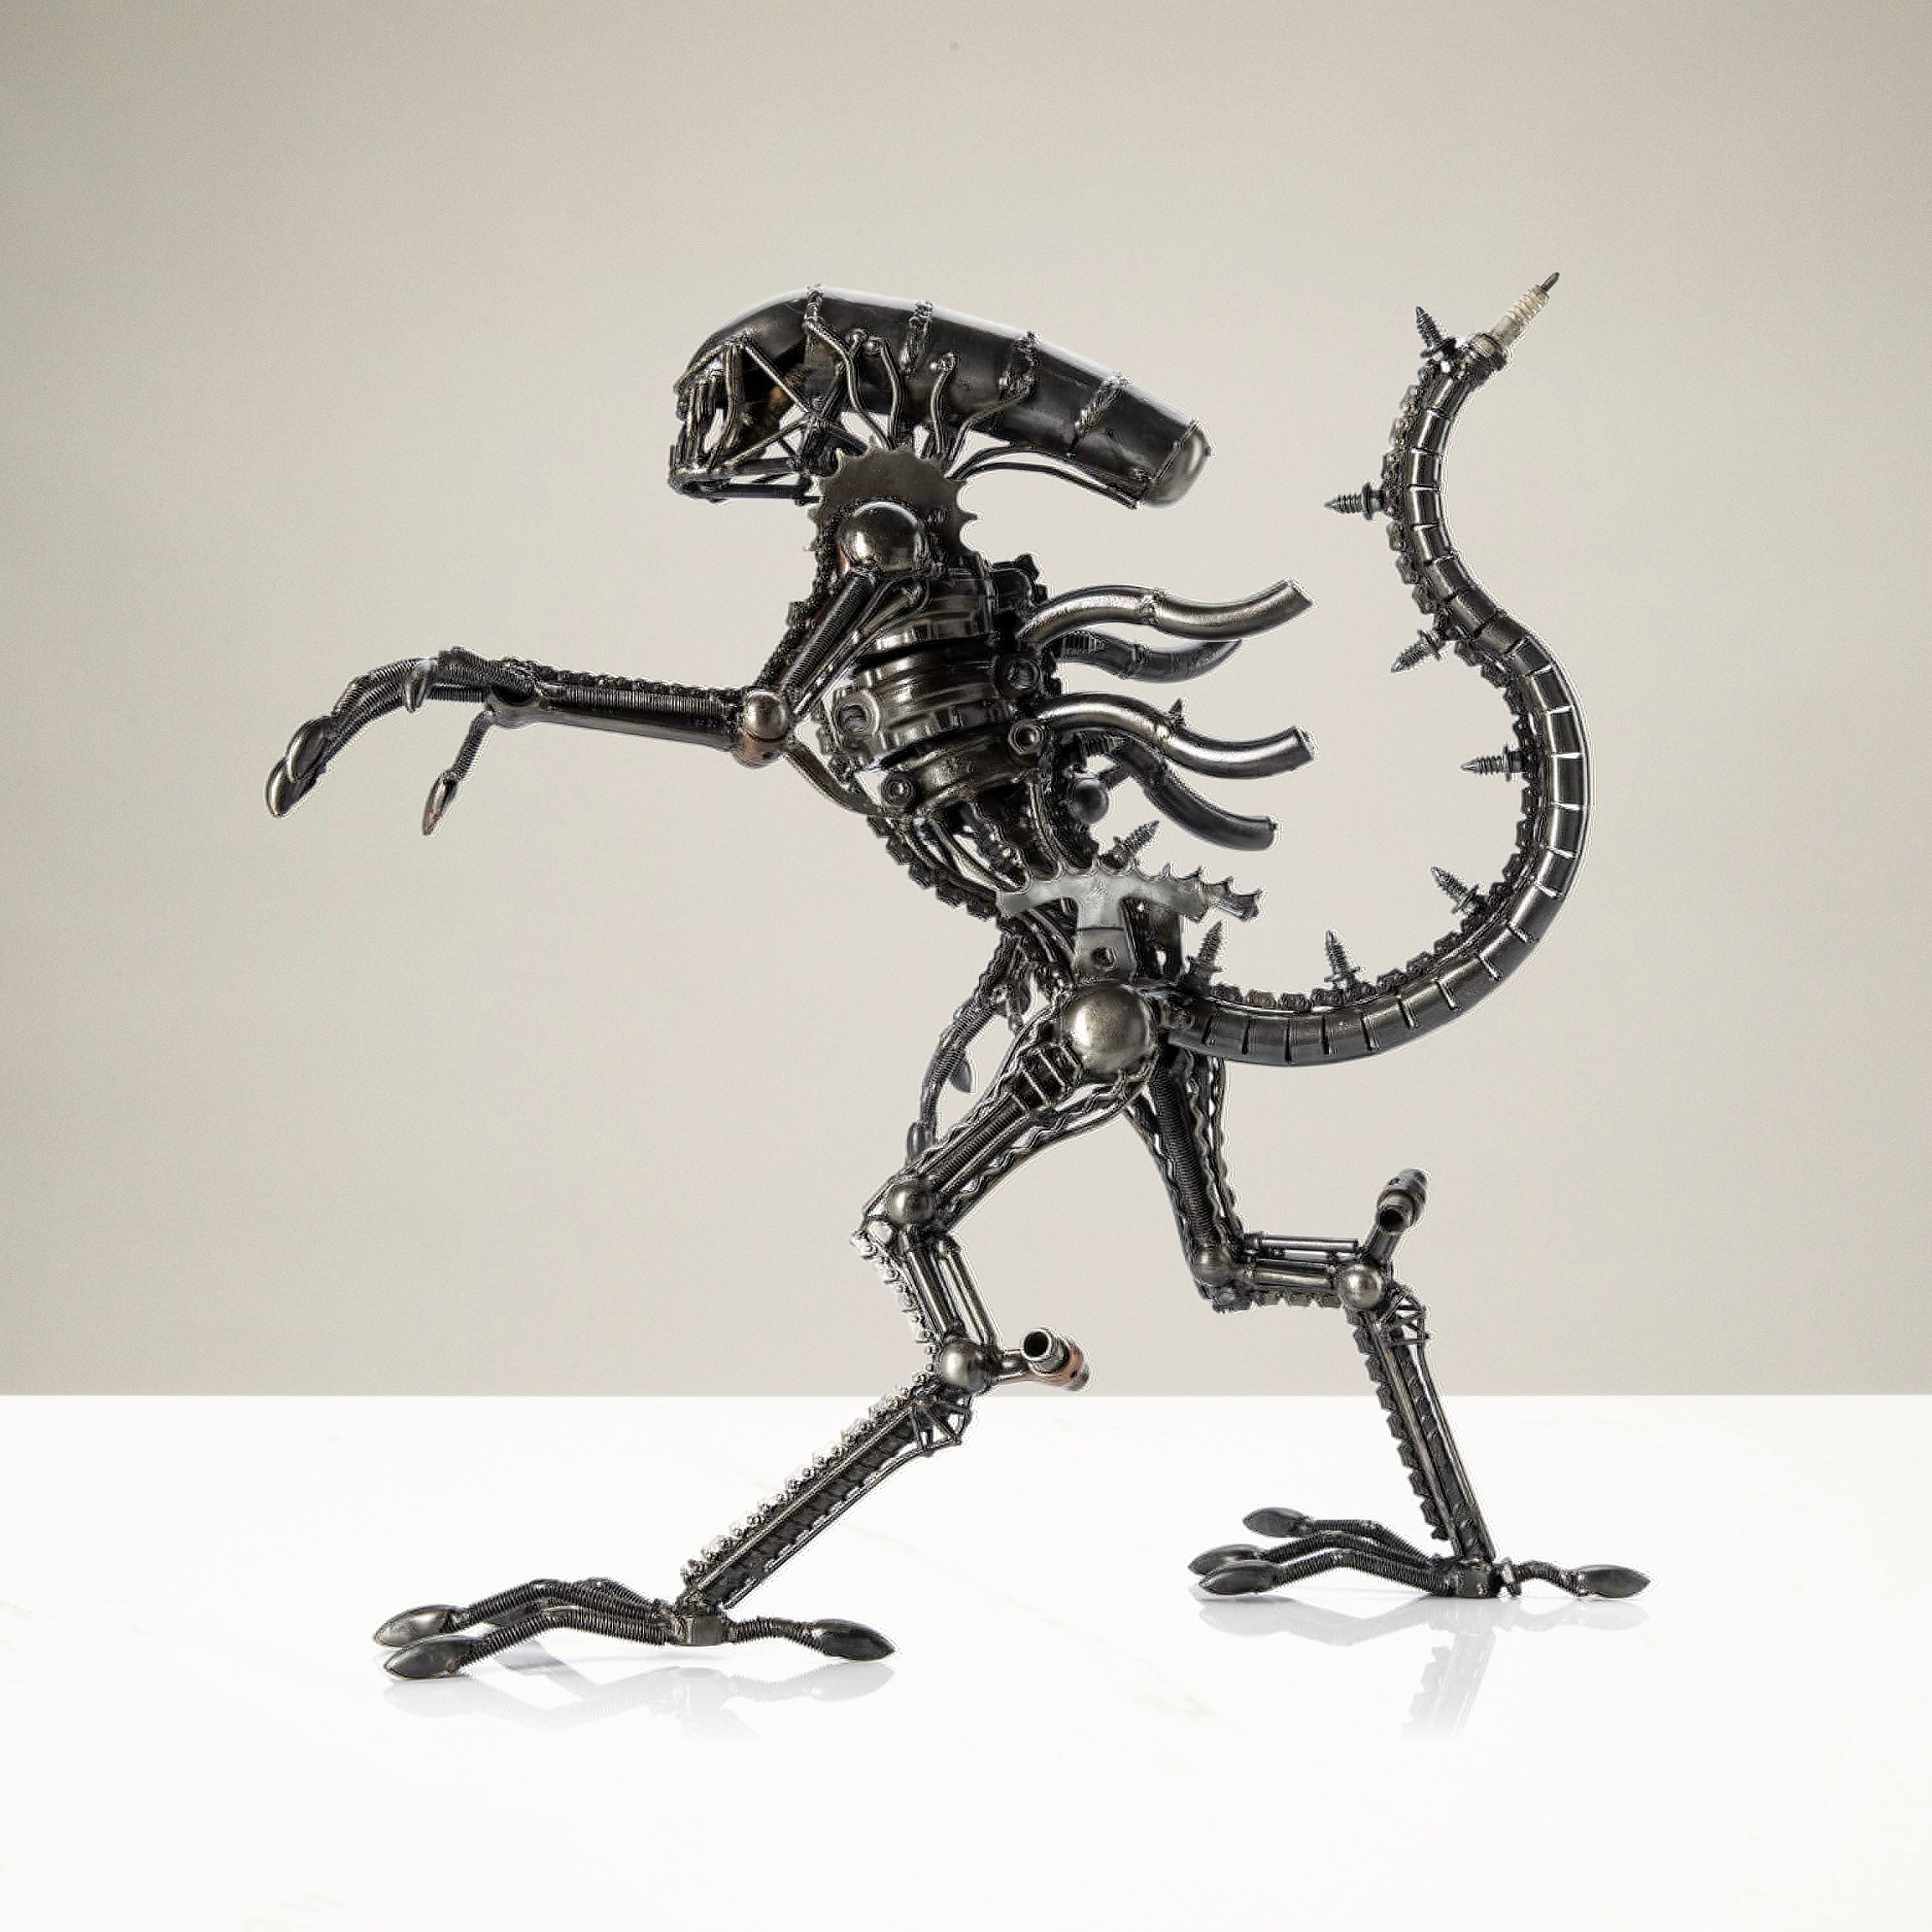 Kalifano Recycled Metal Art 17" Alien Inspired Recycled Metal Sculpture RMS-AS45x40-S